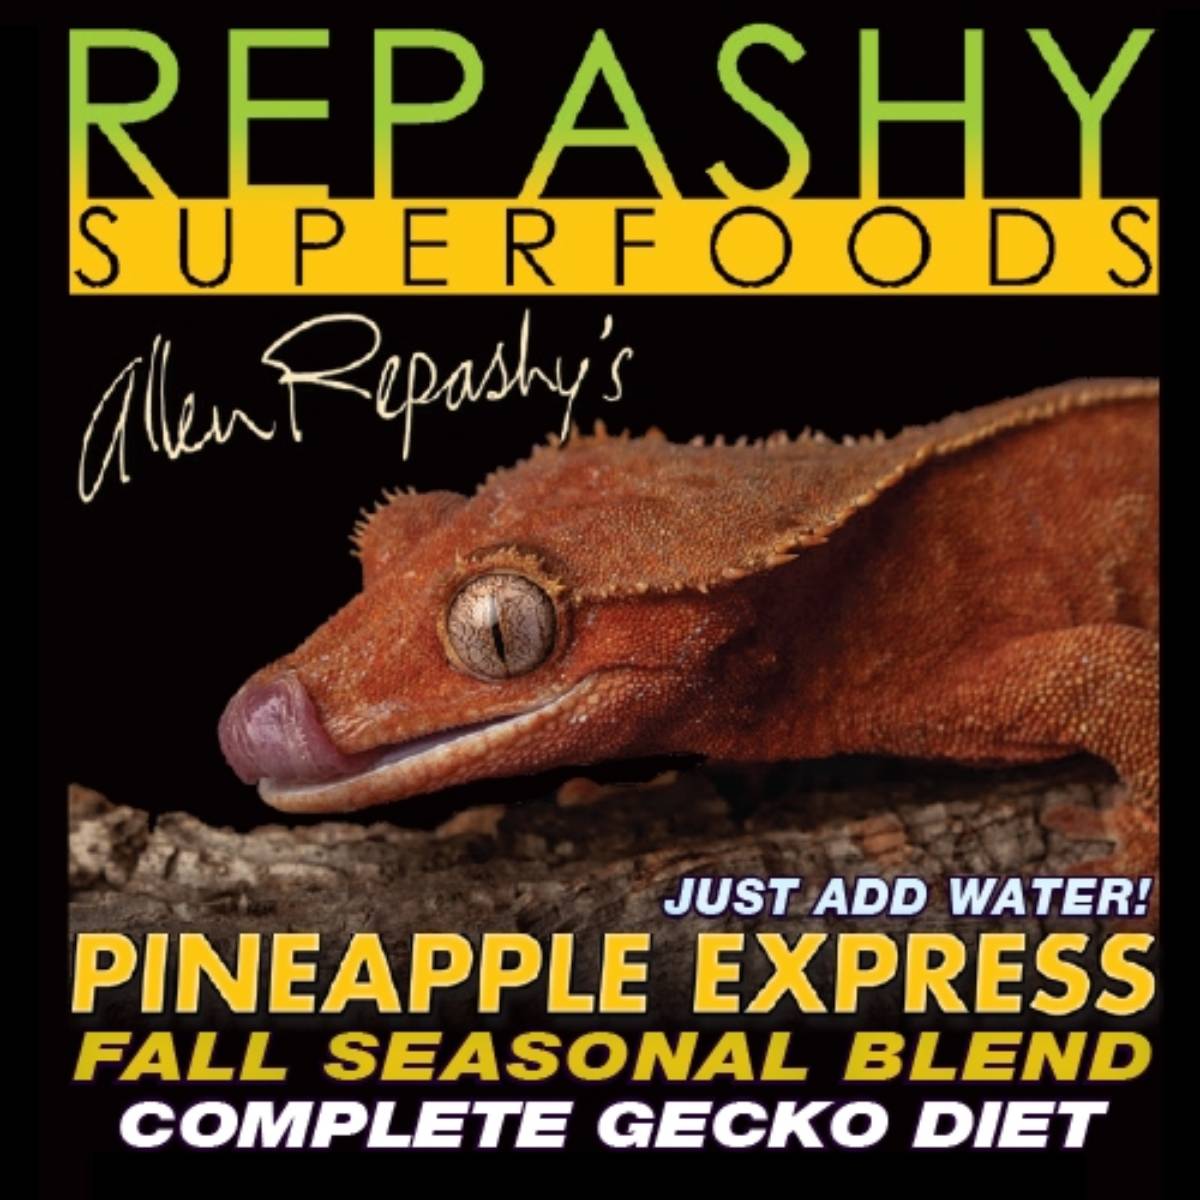 Repashy Superfoods Grubs'N'Fruit / Crested Gecko MRP / Crested Gecko  Classic